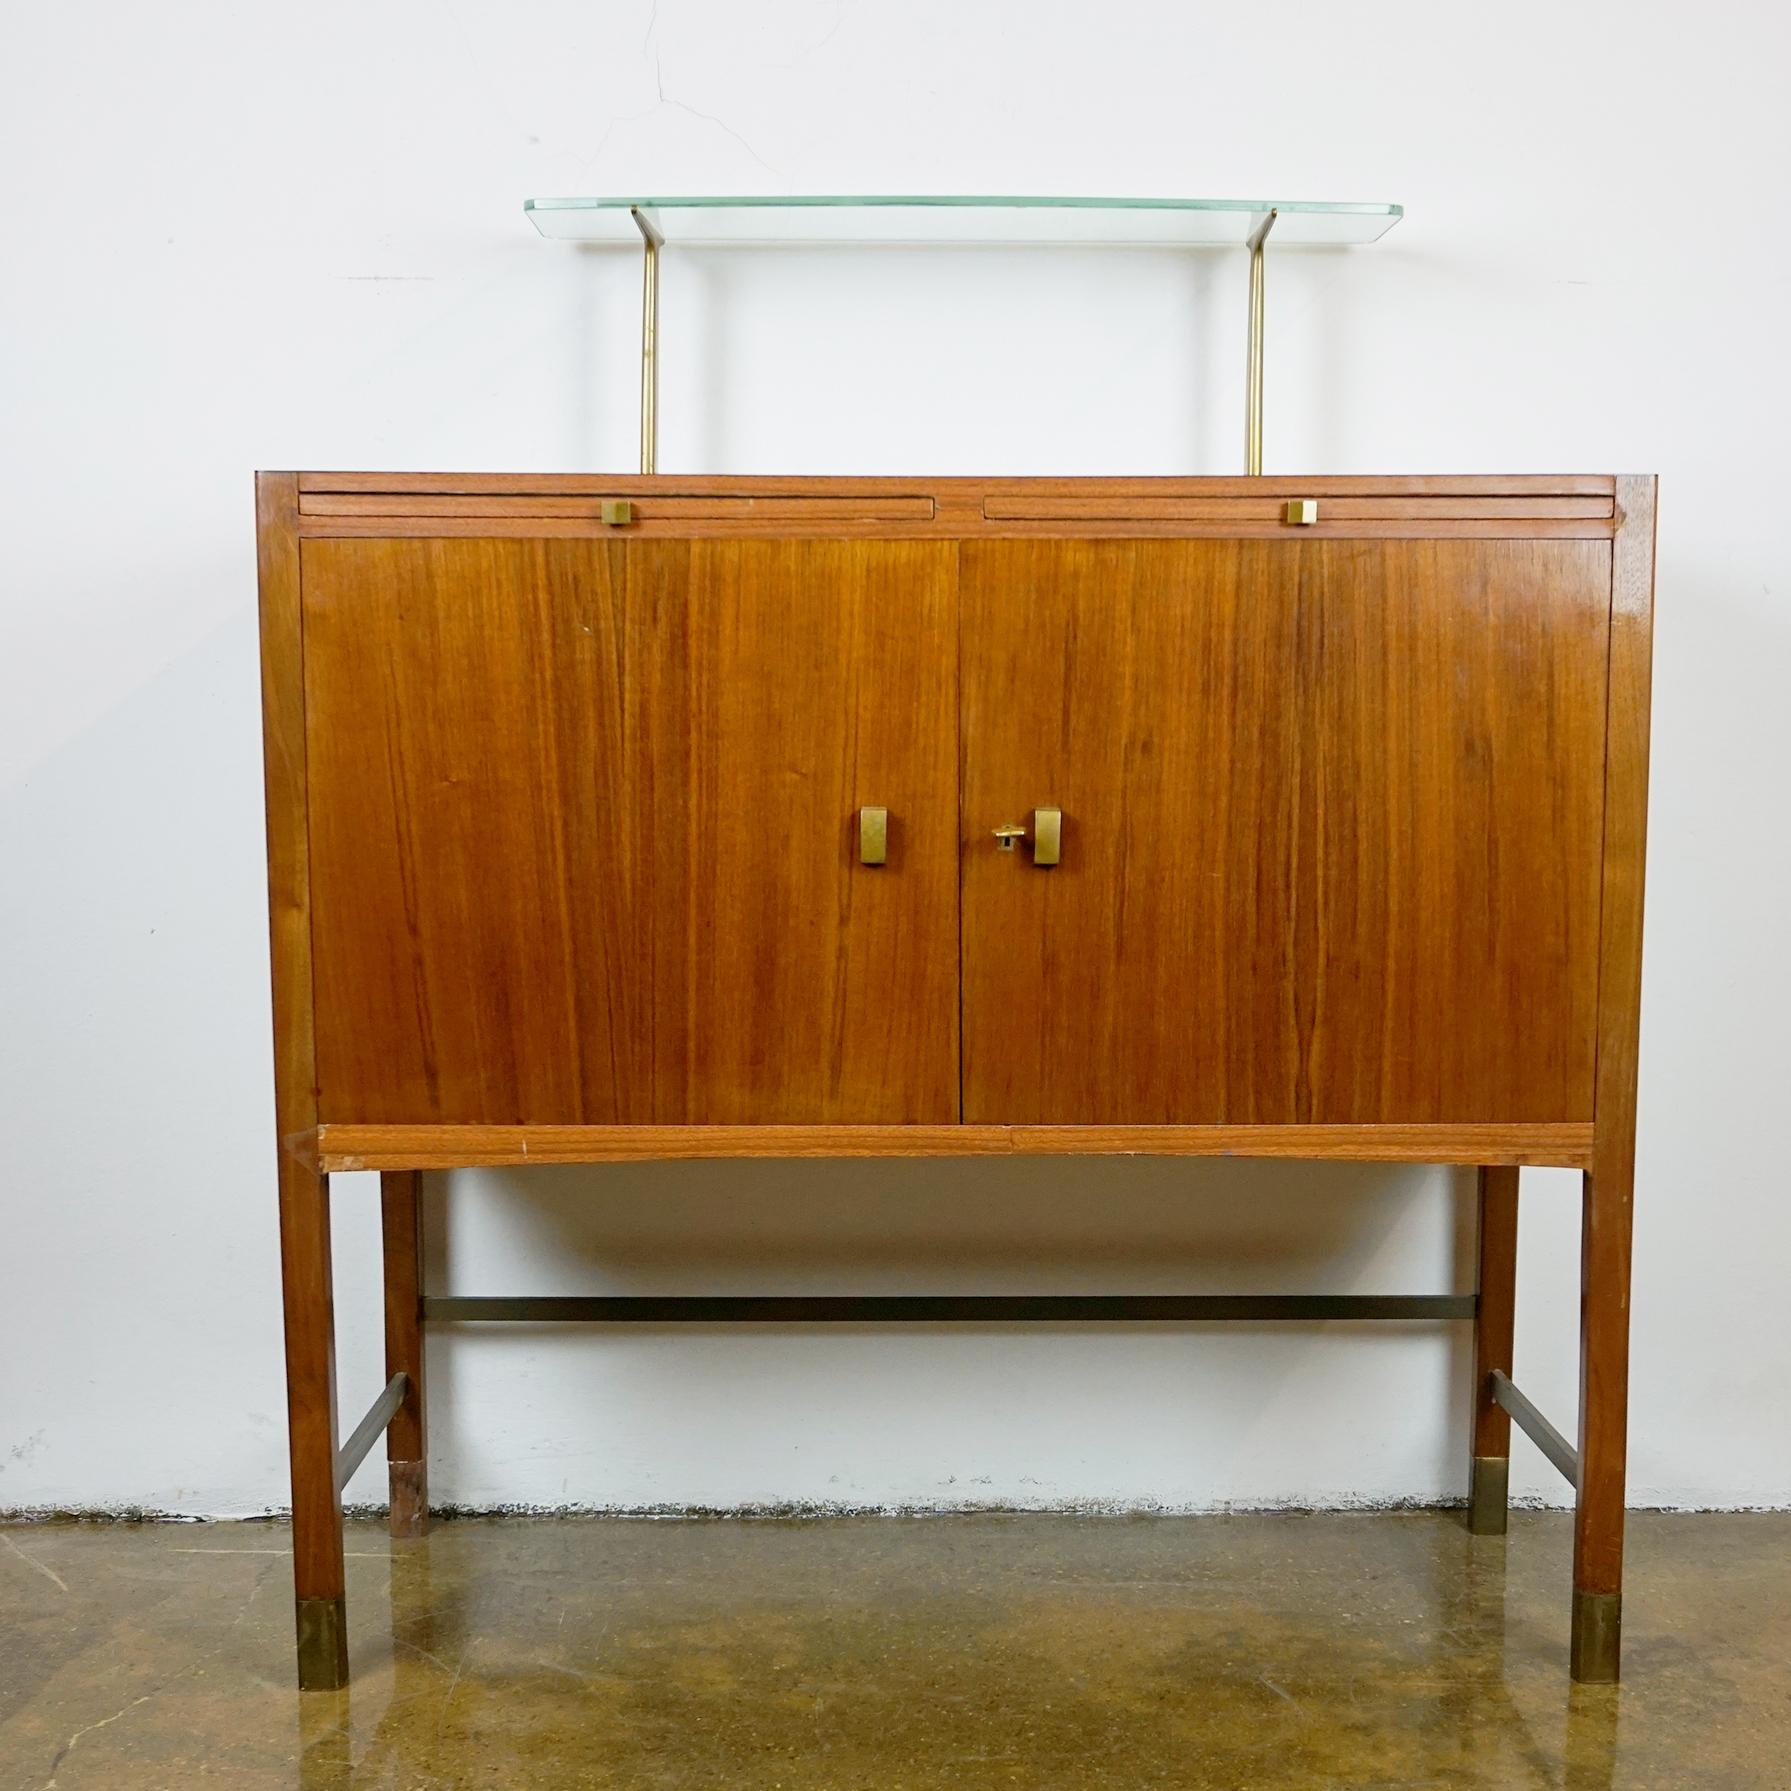 This elegant small cabinet or credenza or sideboard was designed by the Austrian architect and designer Oswald Haerdtl and manufactured in the 1950s in Vienna. 
This charming cabinet is made of Walnut and brass and impresses with its pure design